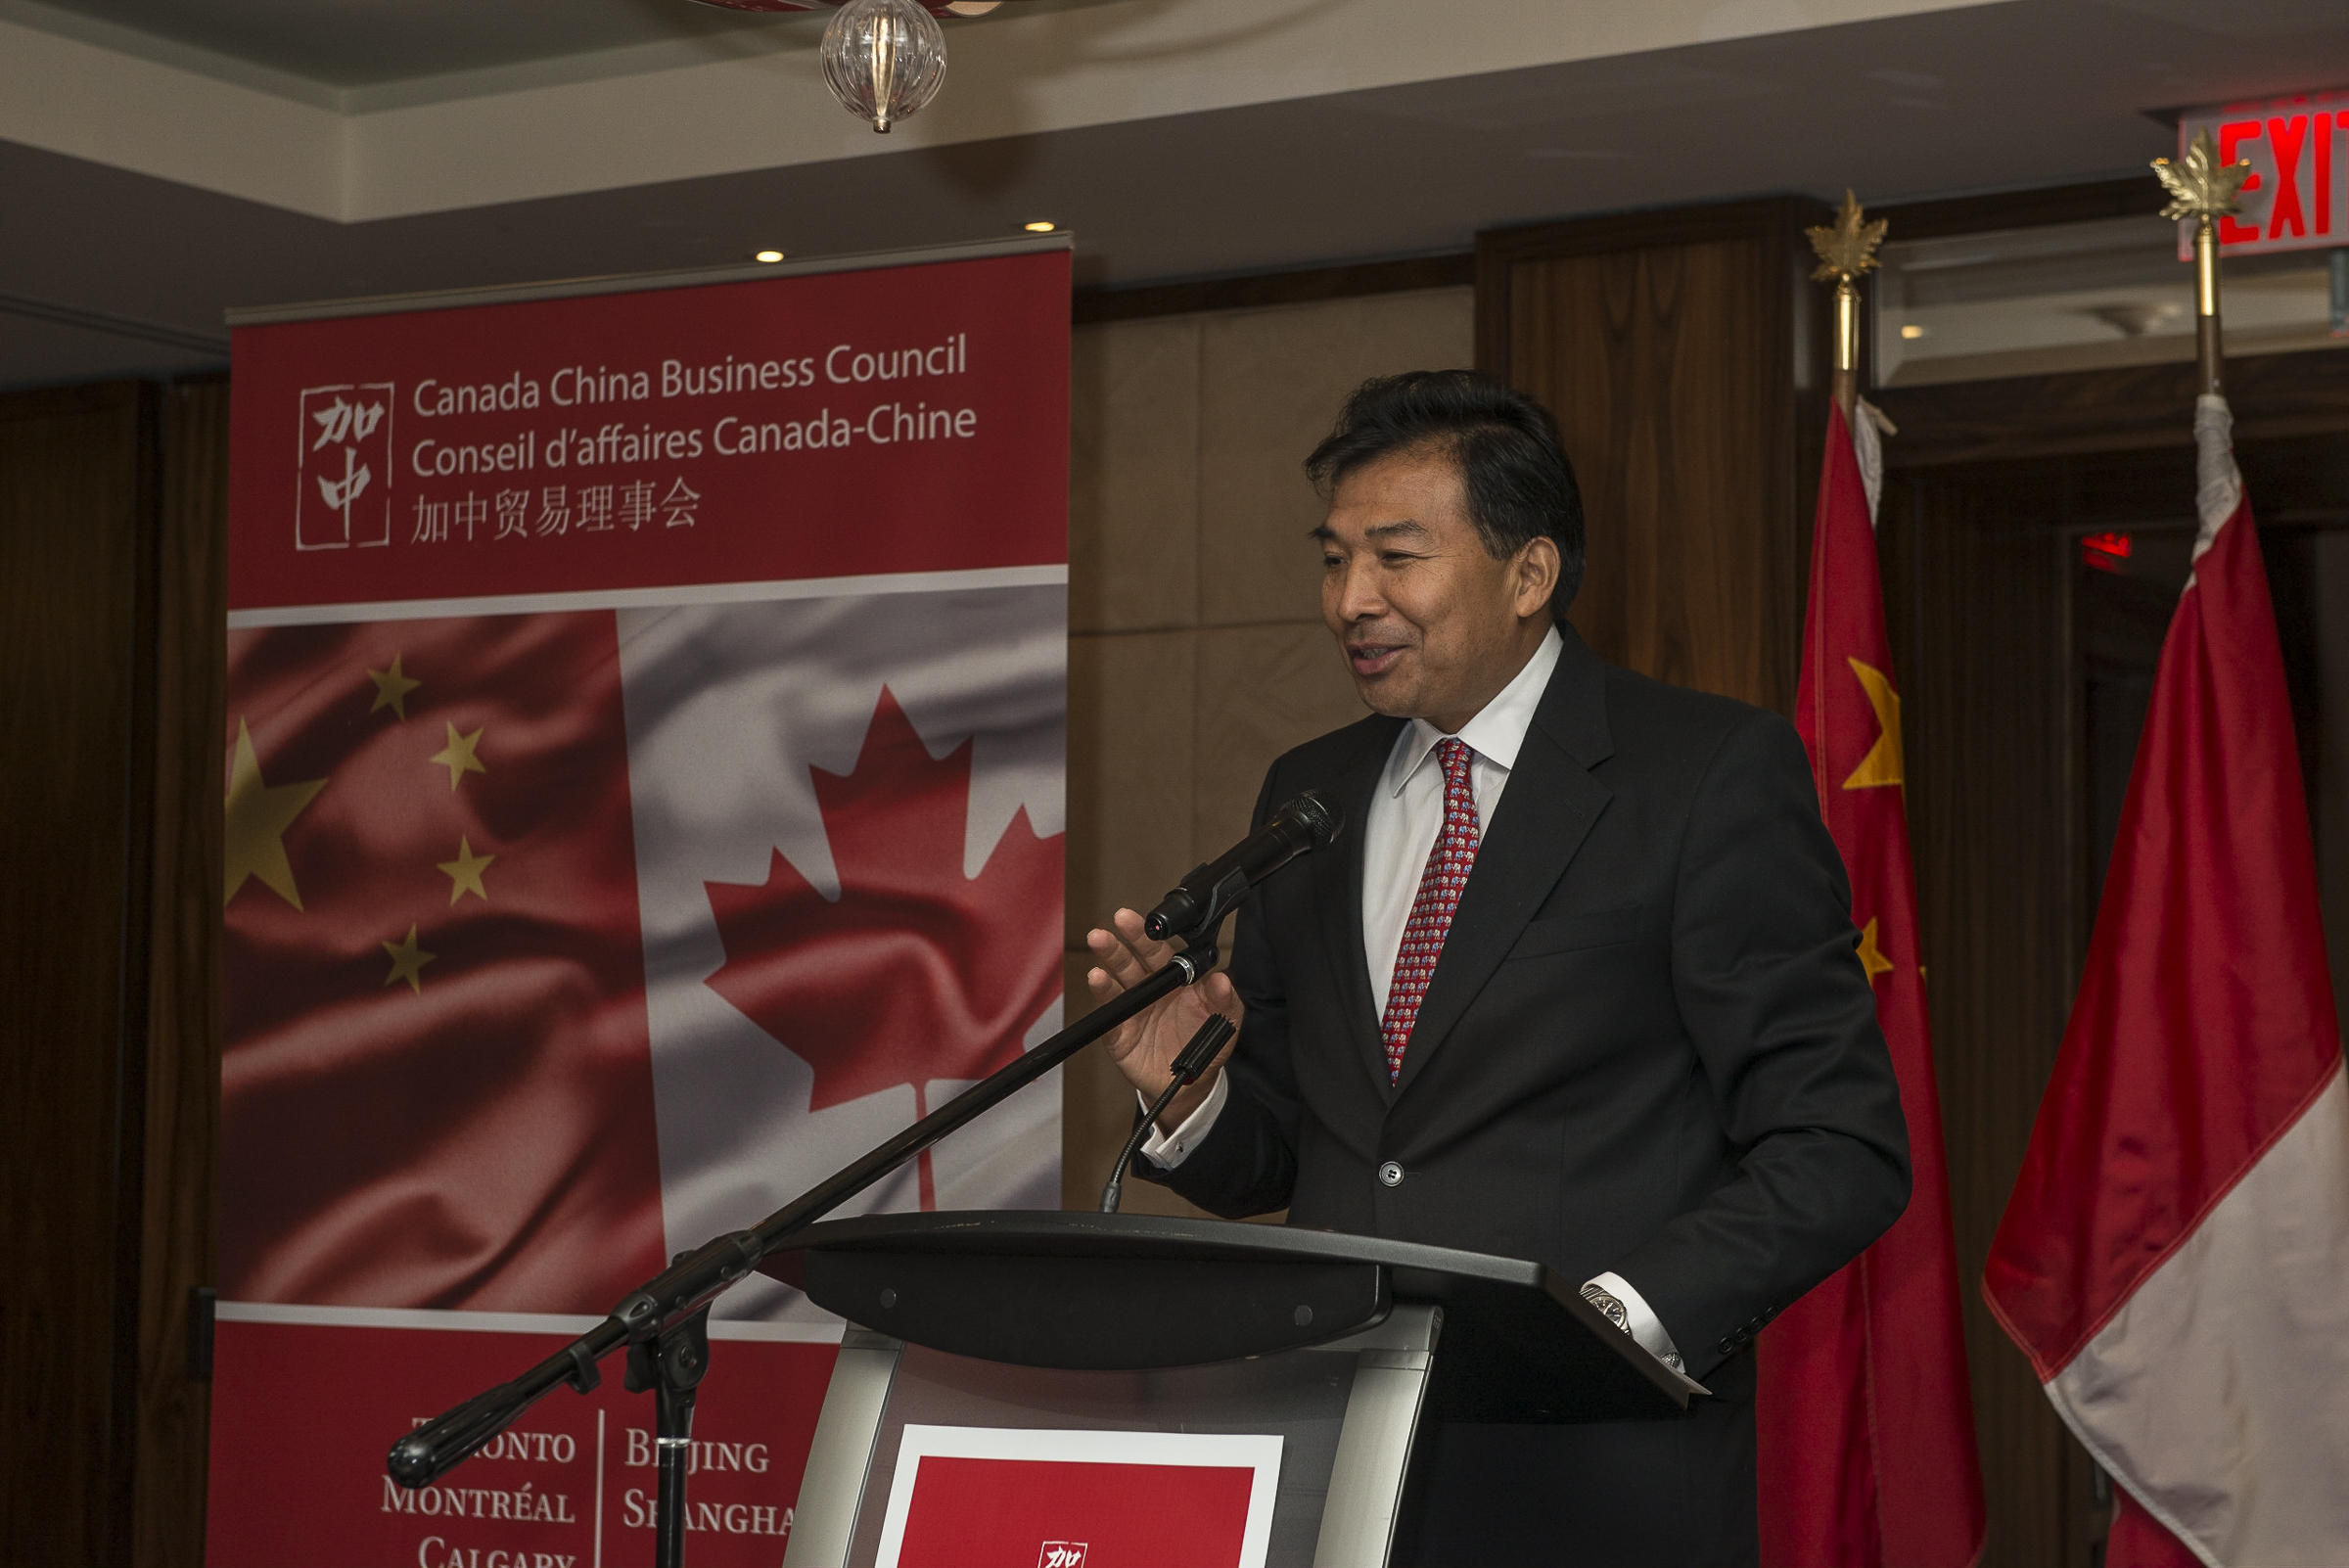 Welcome Dinner for His Excellency LUO Zhaohui, China’s New Ambassador to Canada